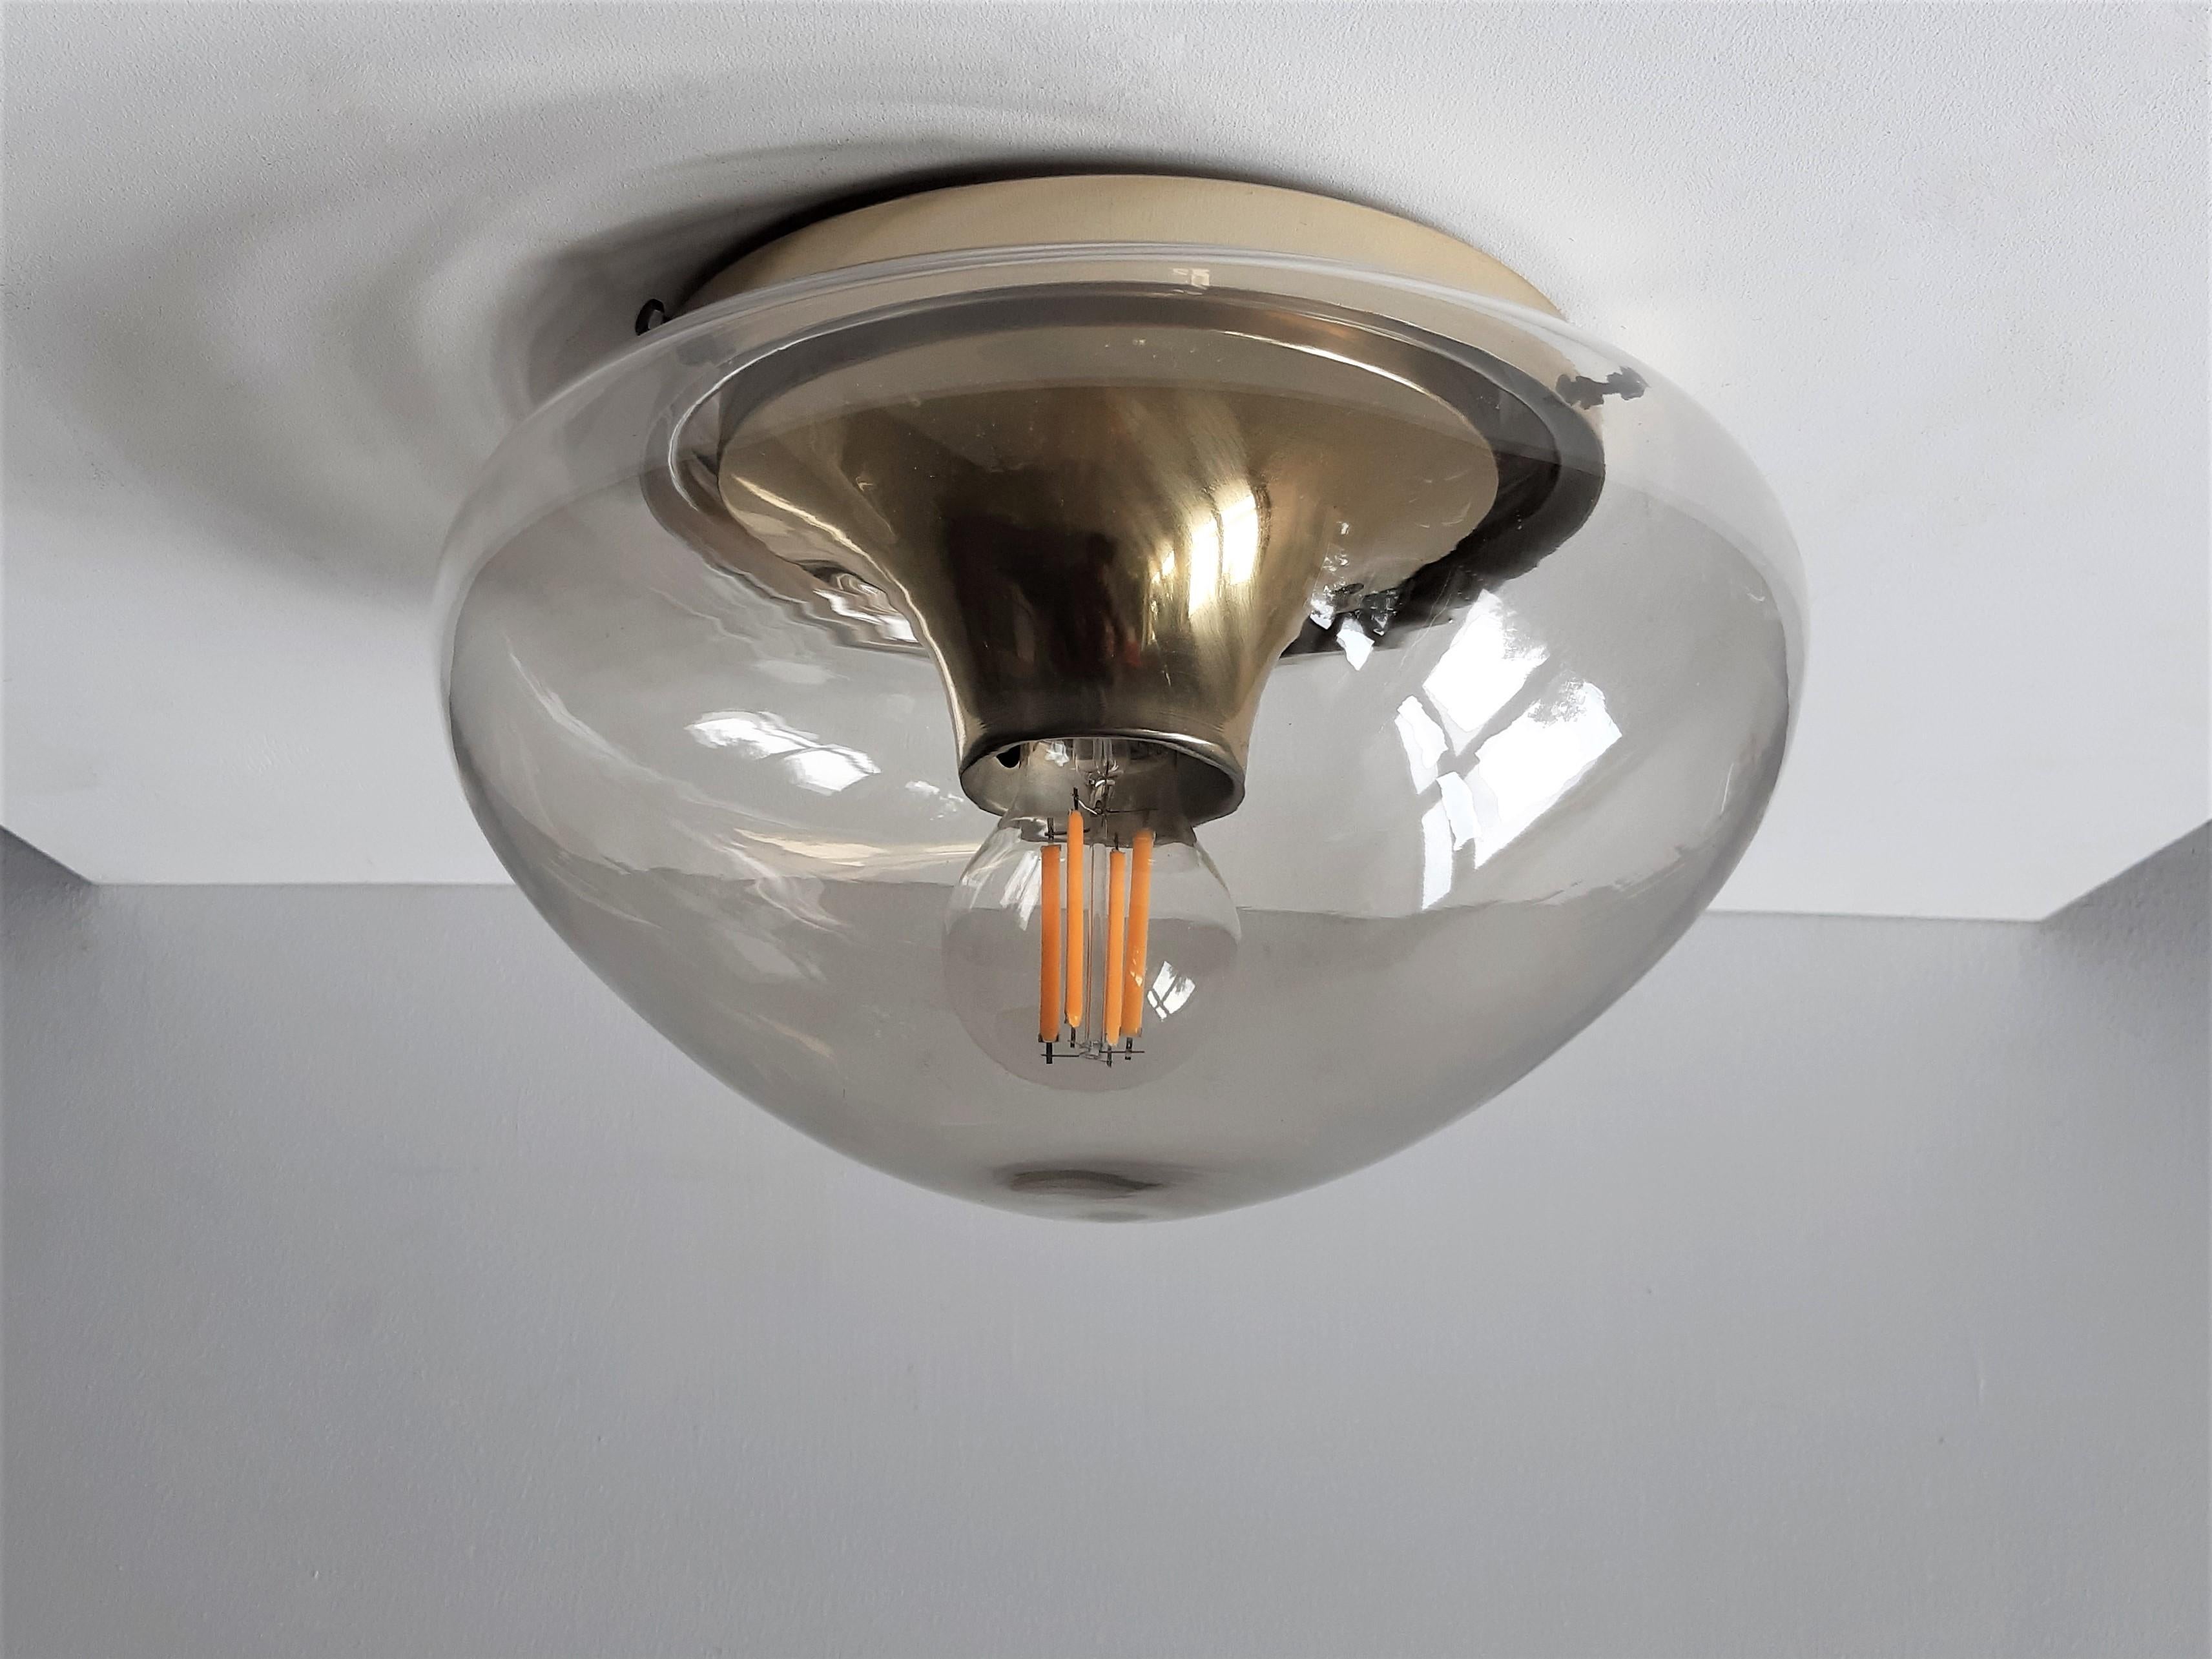 This ceiling lamp or flushmount was made by the Dutch lamp manufacturer Dijkstra in the 1960s-1970s. It has a hand blown glass lampshade. The round aluminum ceiling mount has a conical tube as a light fixture. This lamp gives a very nice warm light